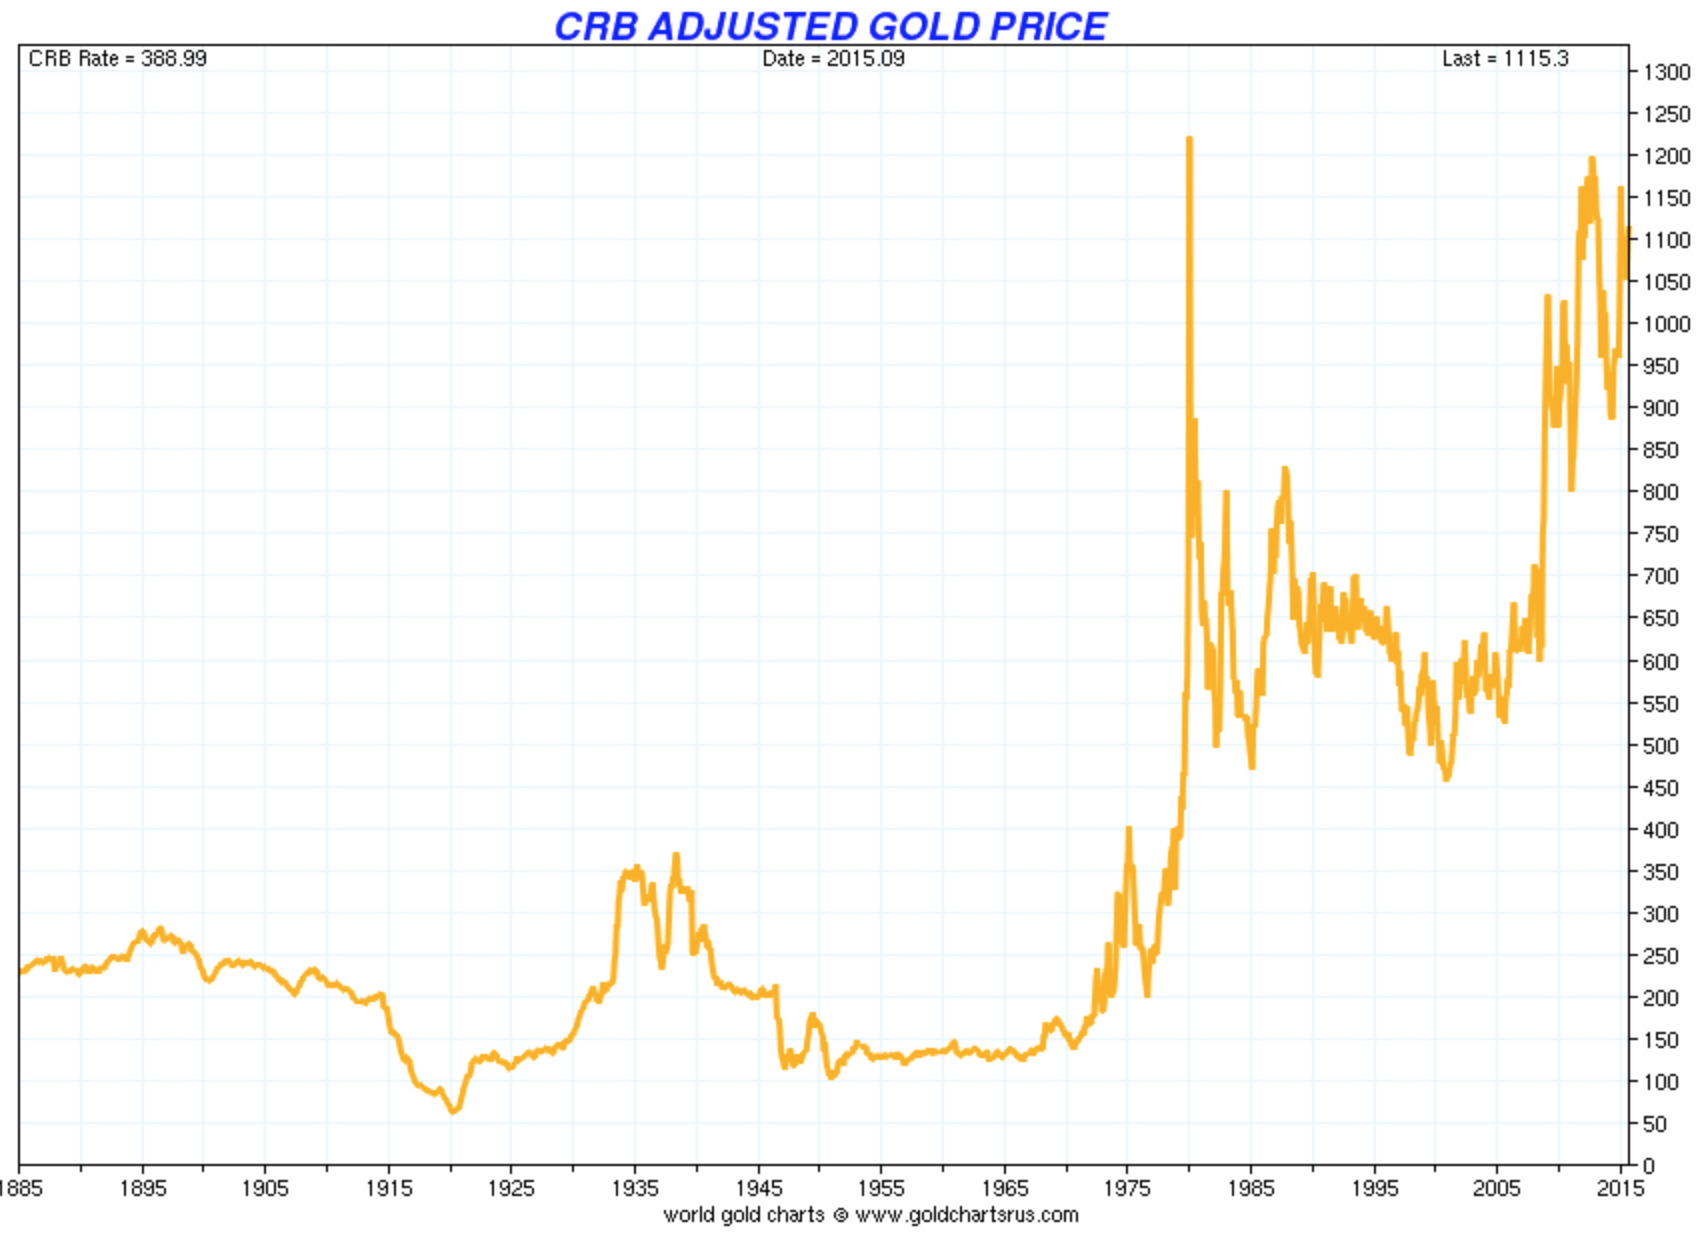 Gold price adjusted by a basket of commodities (CRB Index)